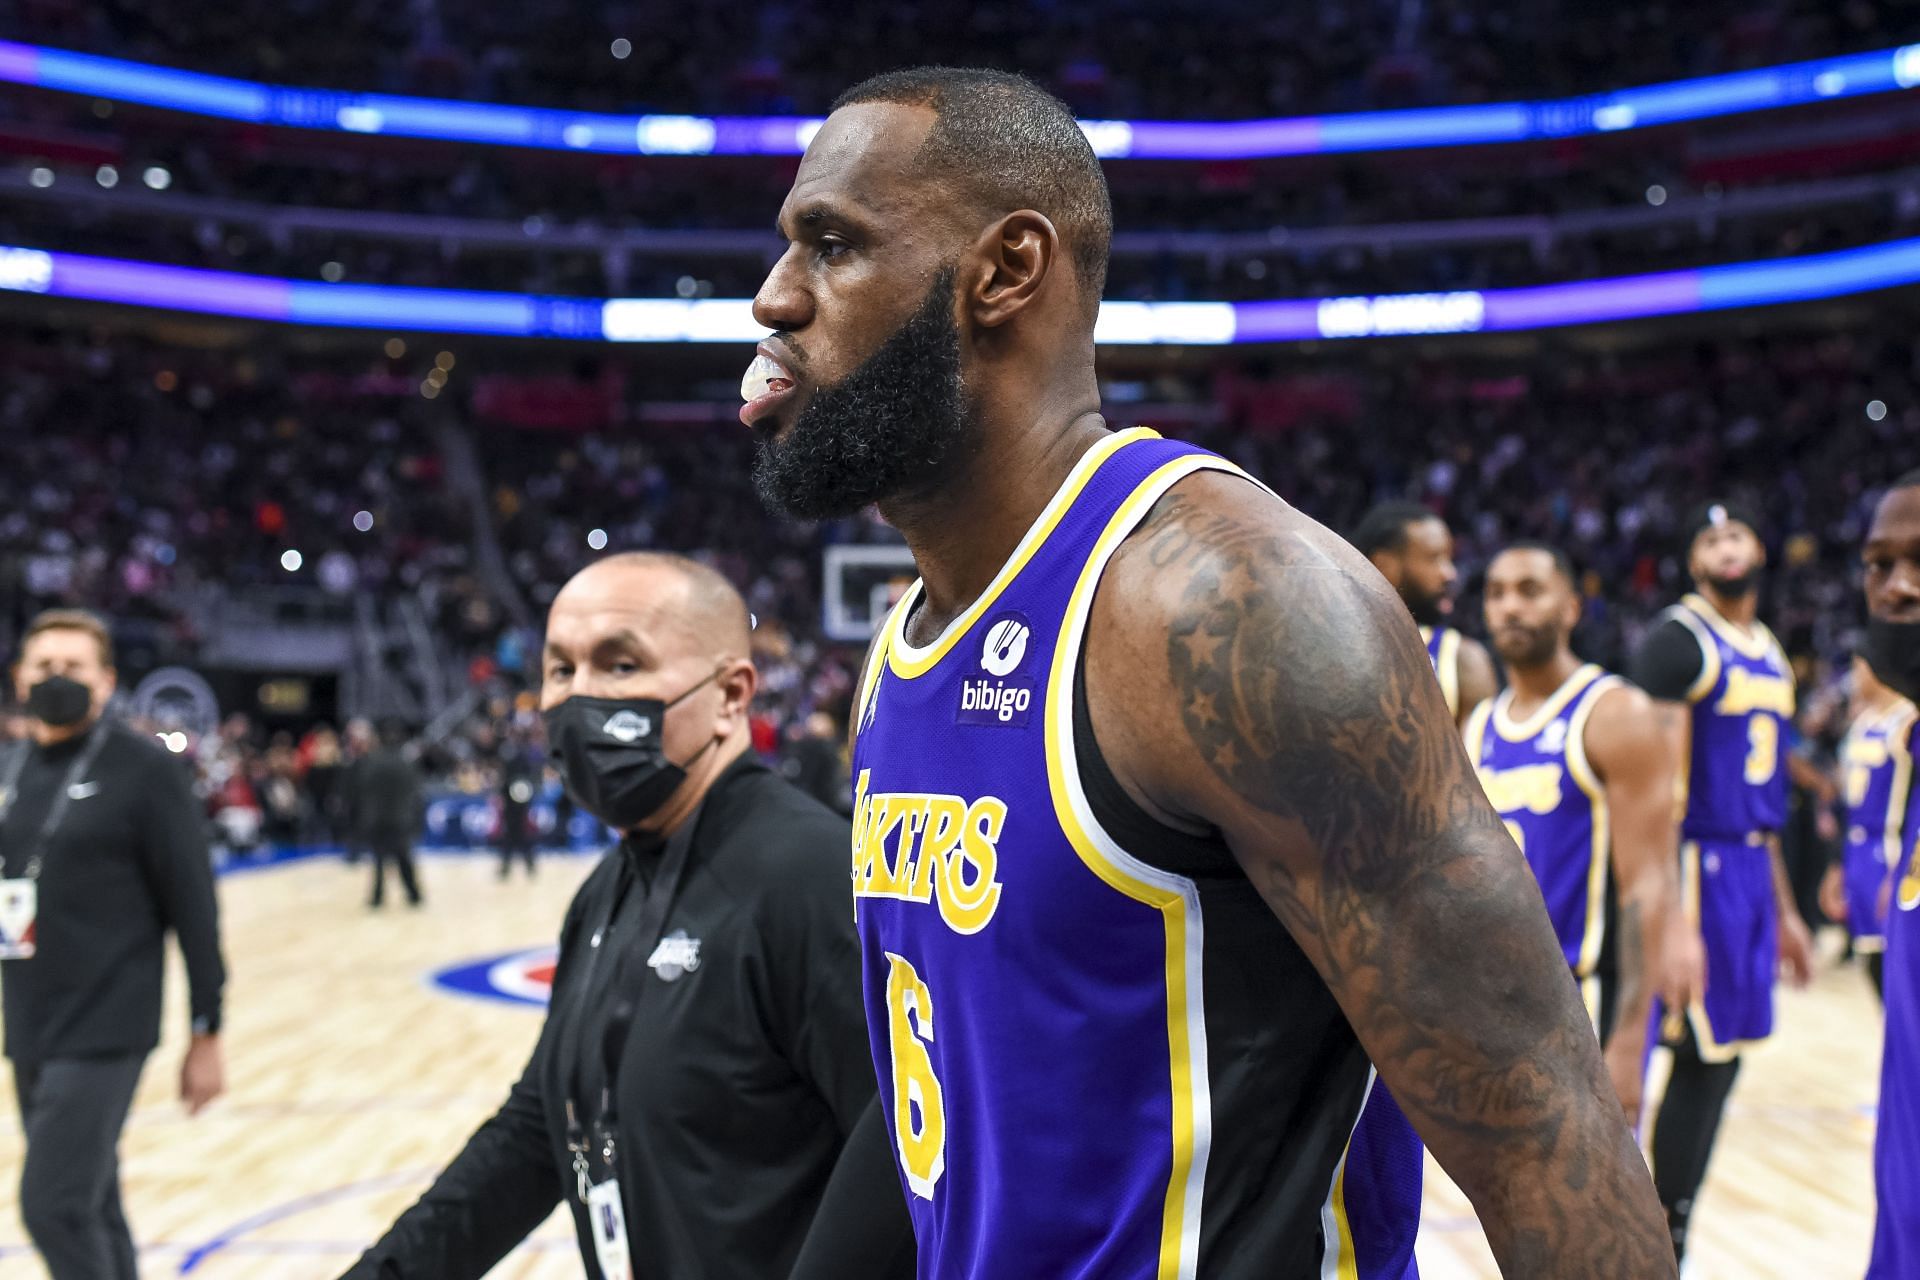 Lakers superstar LeBron James was recently ejected against the Pistons